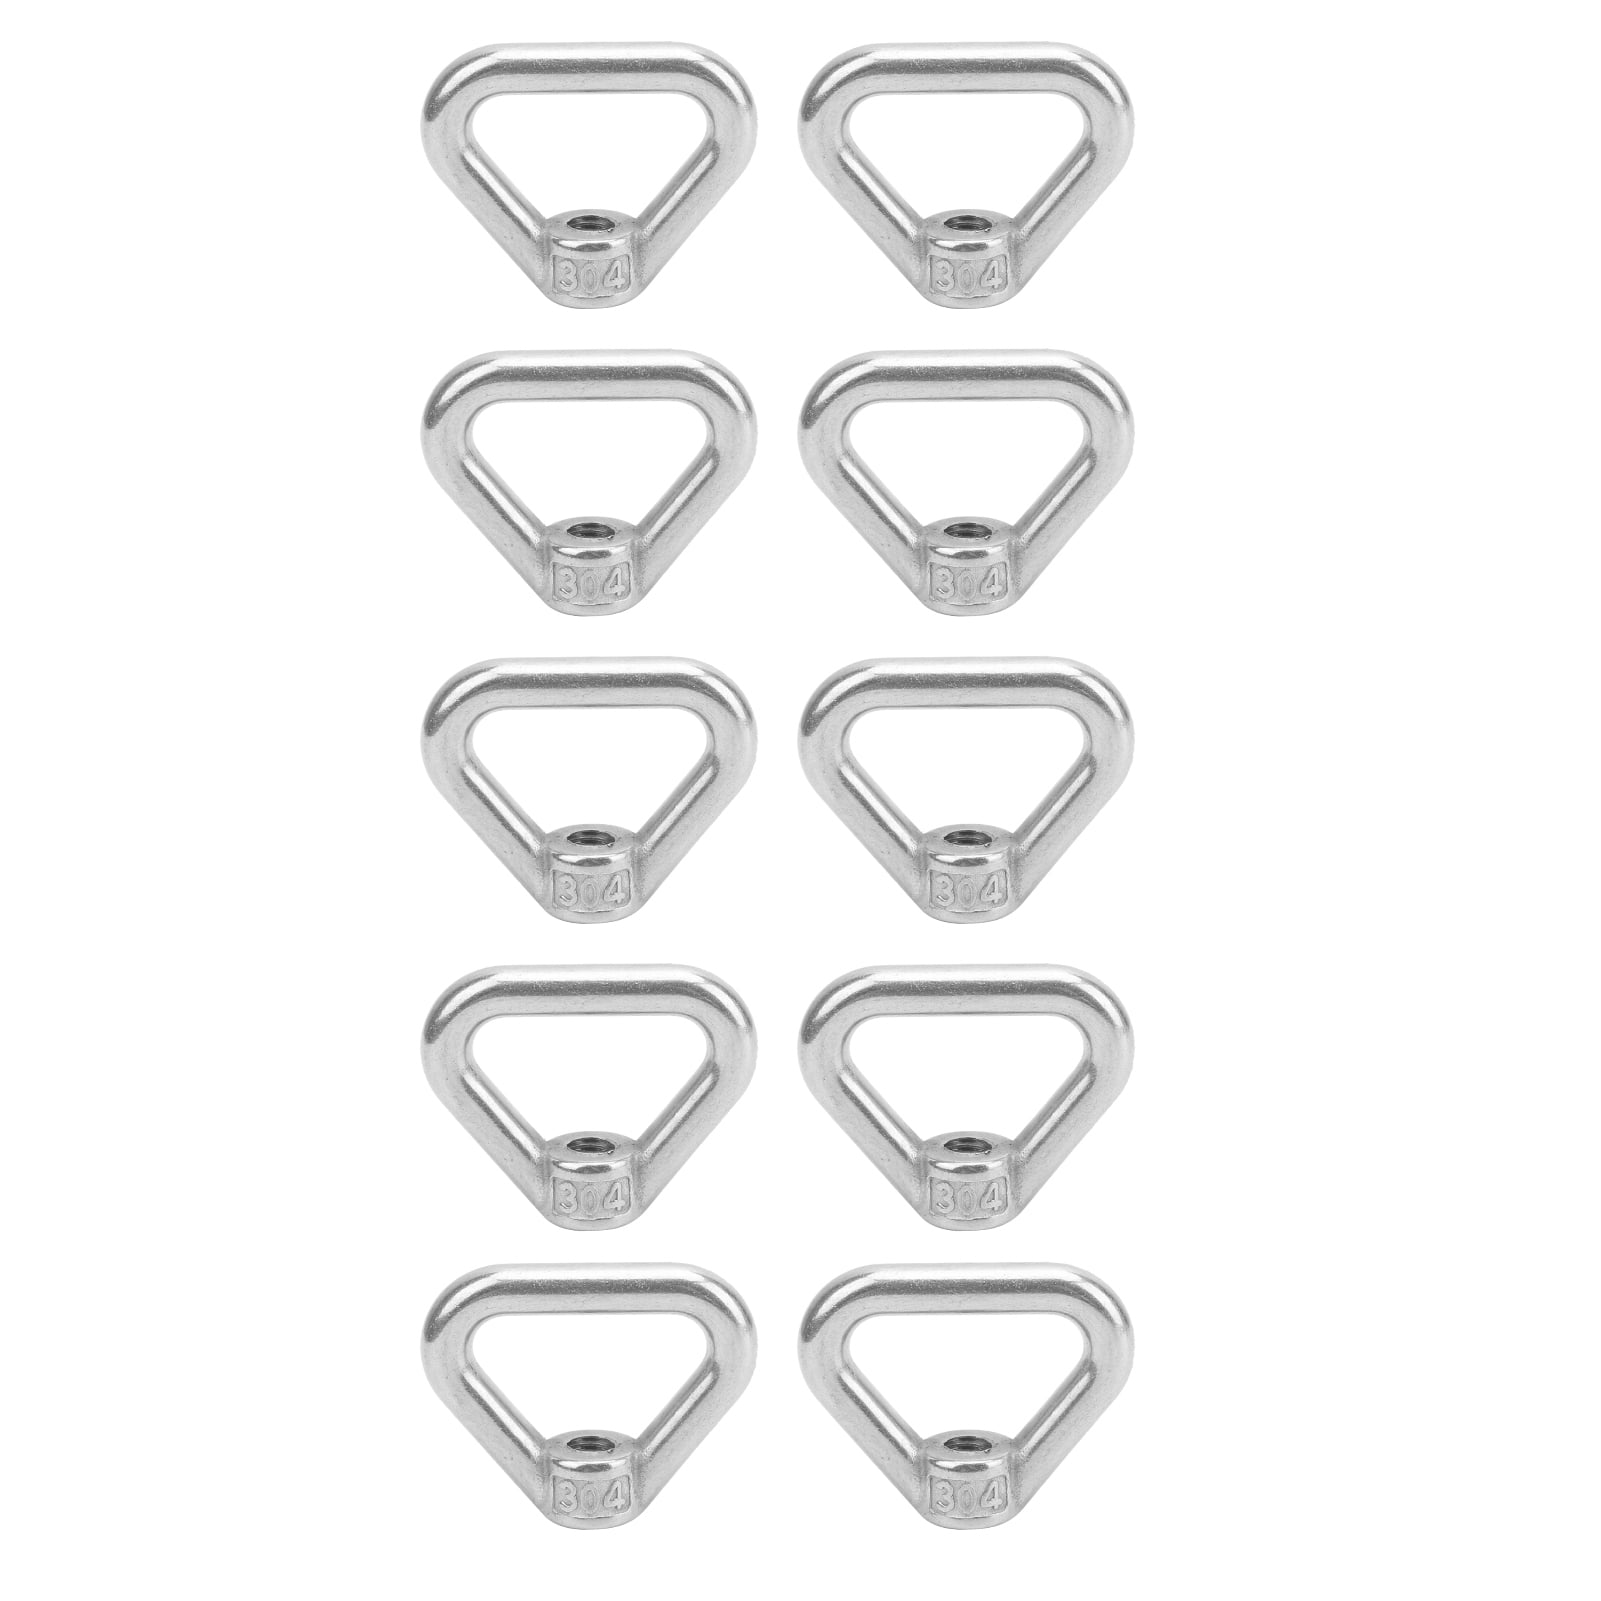 Details about   10pcs Silver Screw Nut 304 Stainless Steel Triangle Ring Nut Eye Nut Fastener M8 